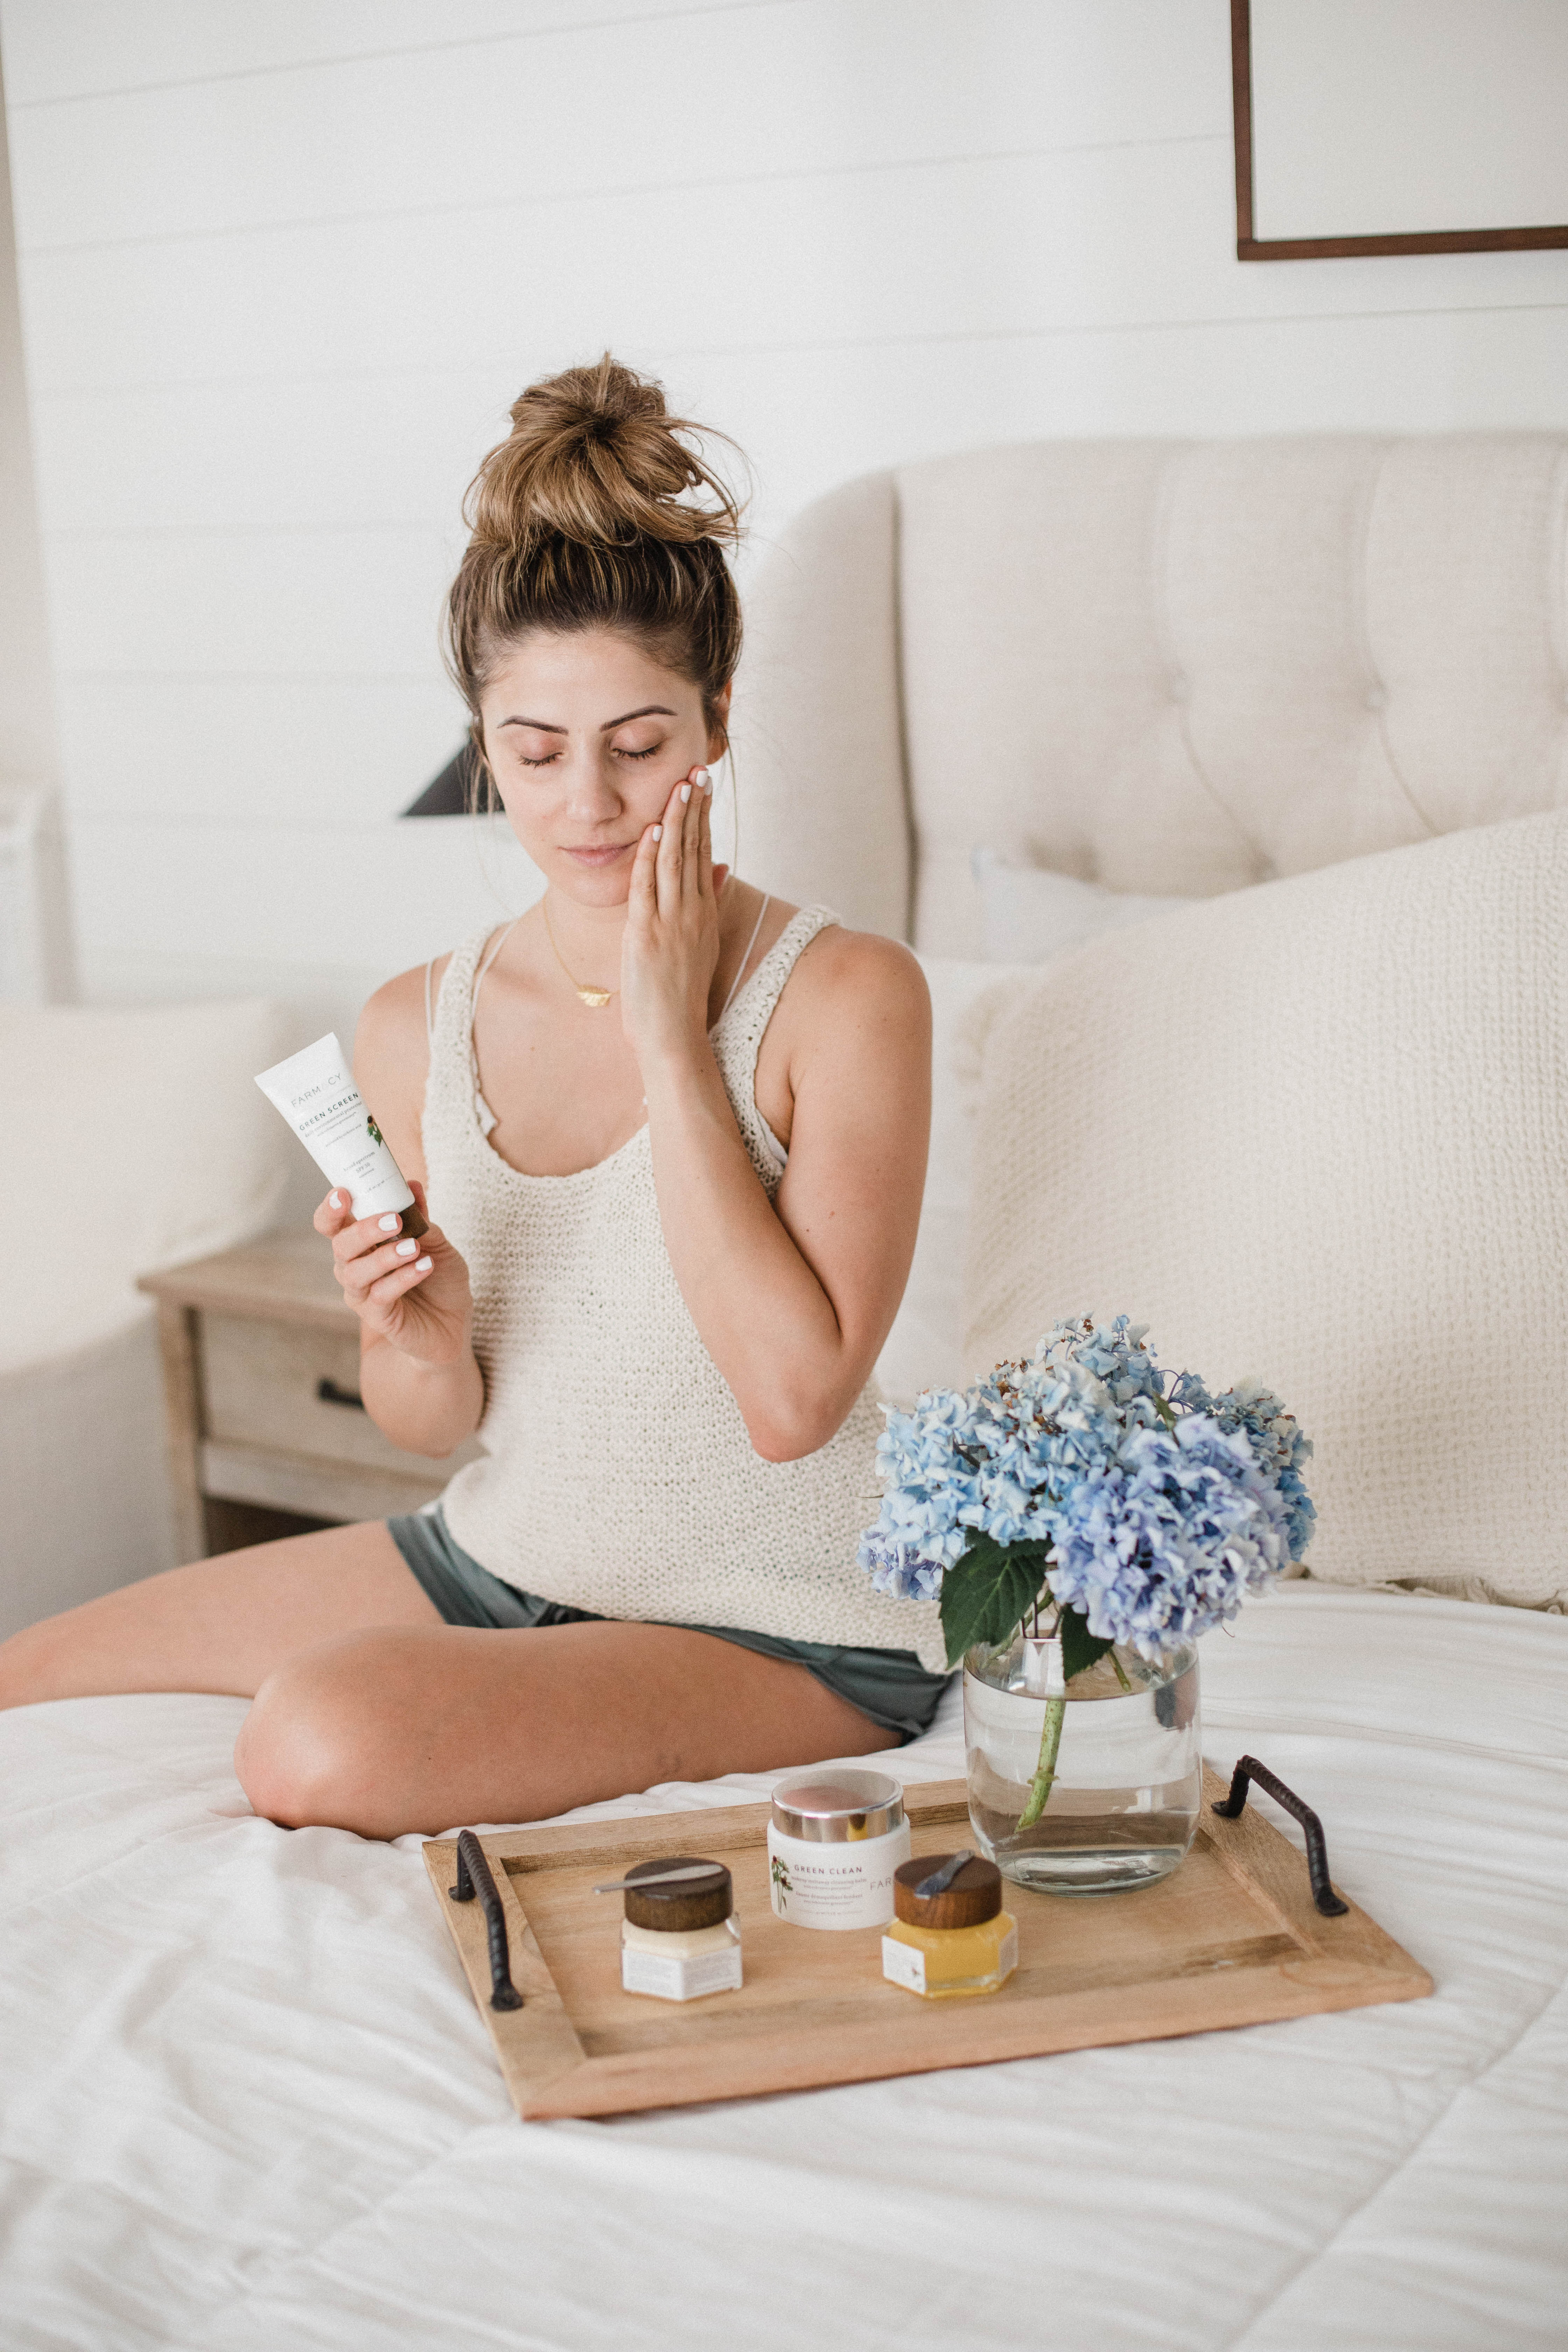 Connecticut Life and style blogger Lauren McBride shares 4 of Farmacy Beauty's best seller clean skincare products, including Green Clean, Honey Drop, Honey Potion, and Green Screen.